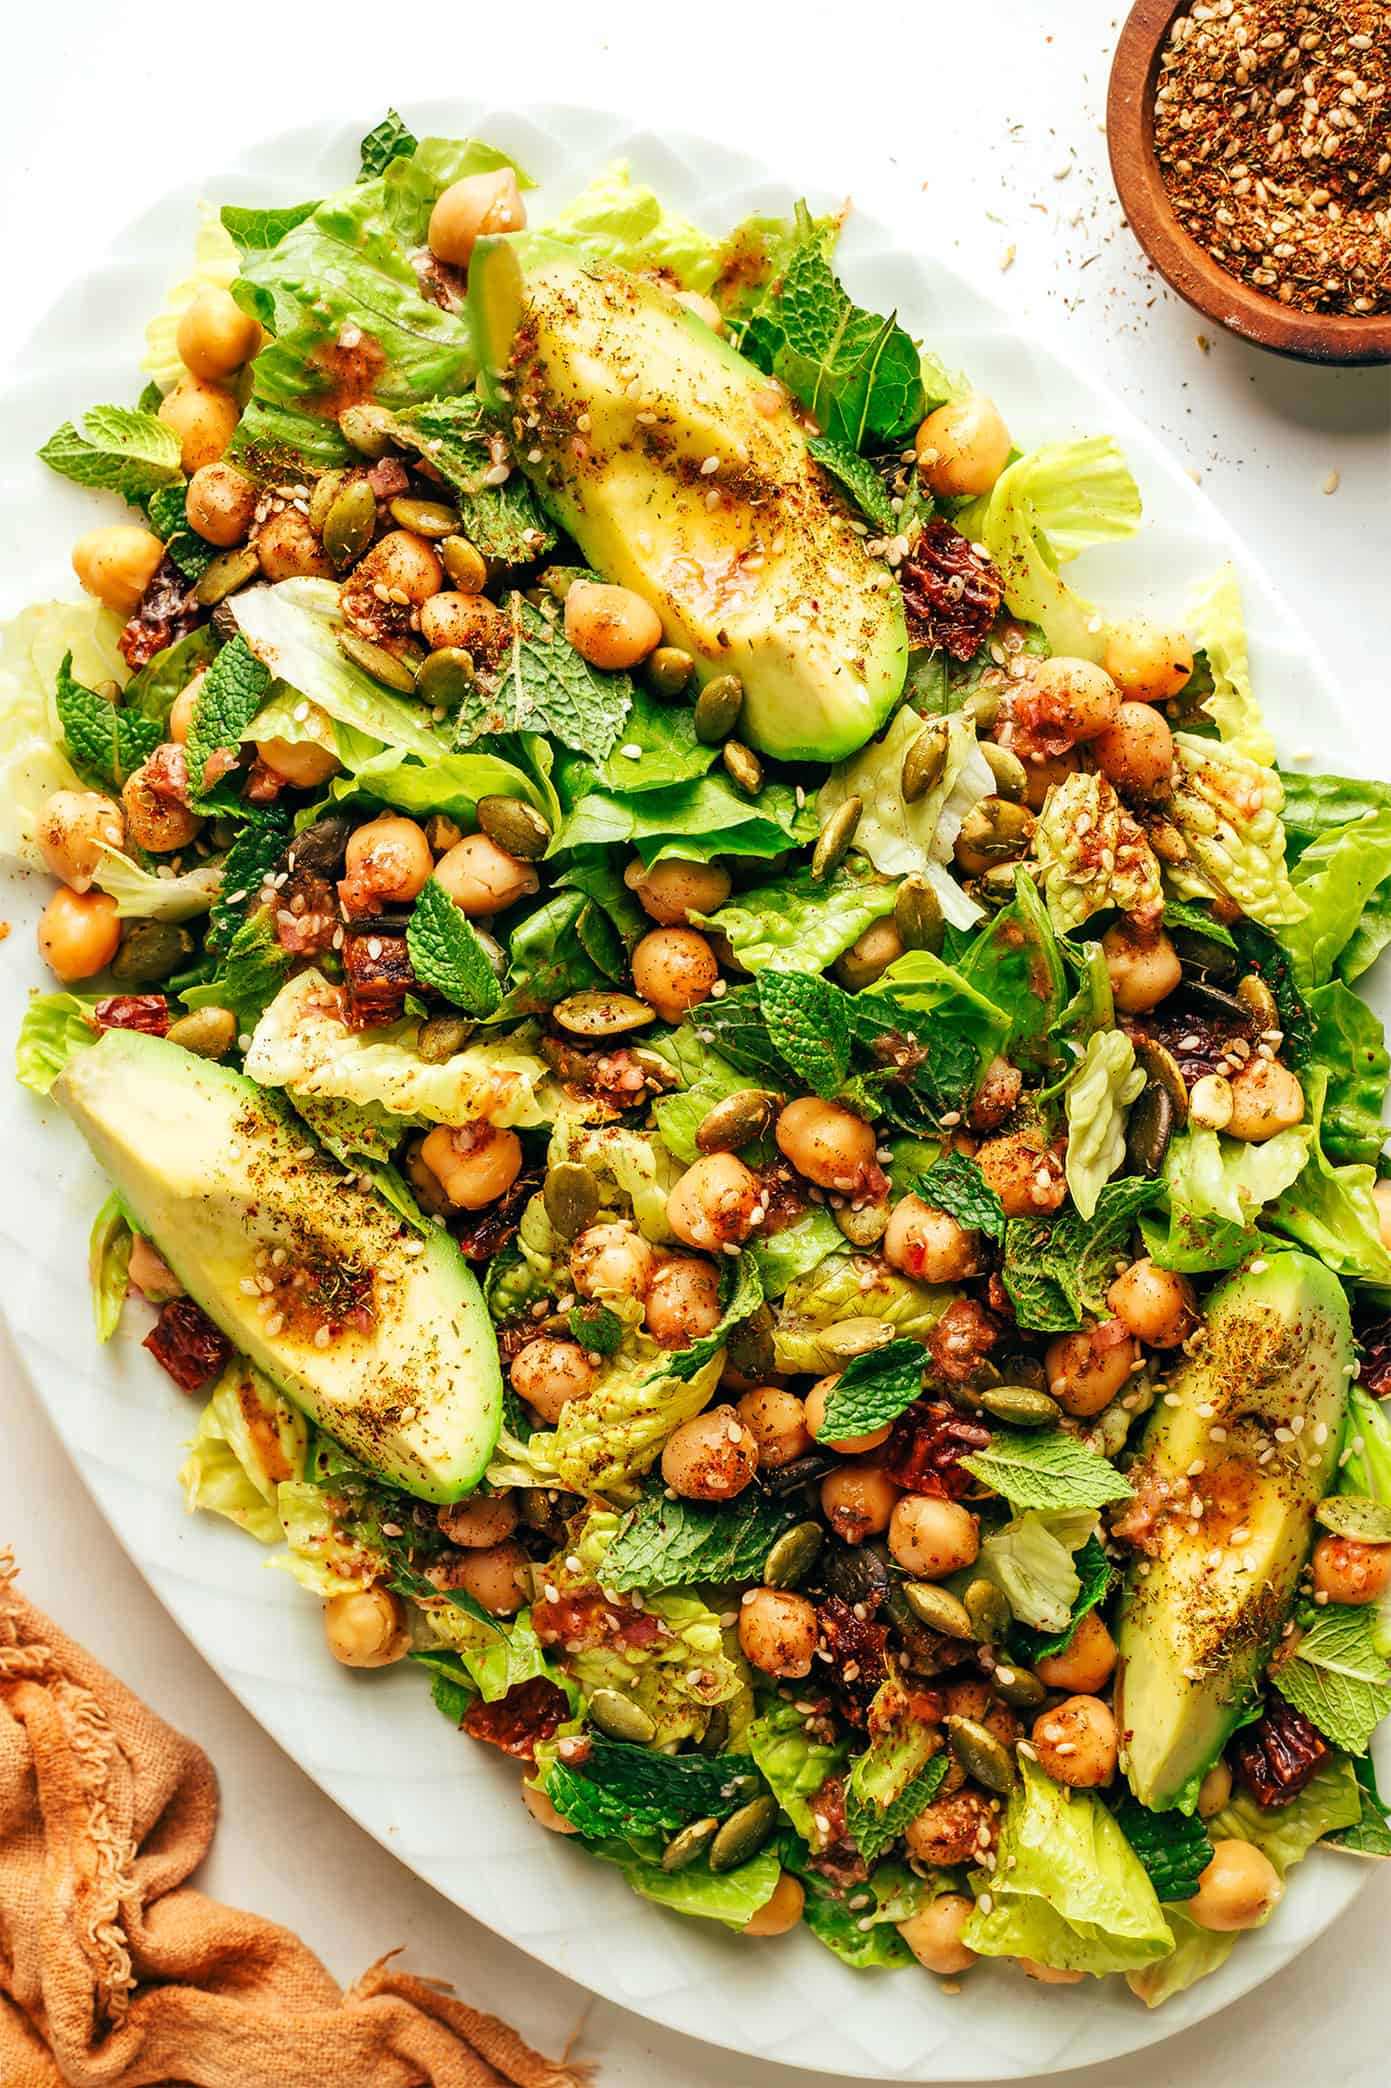 Chickpea, Date and Avocado Salad with Za'atar Vinaigrette on serving platter